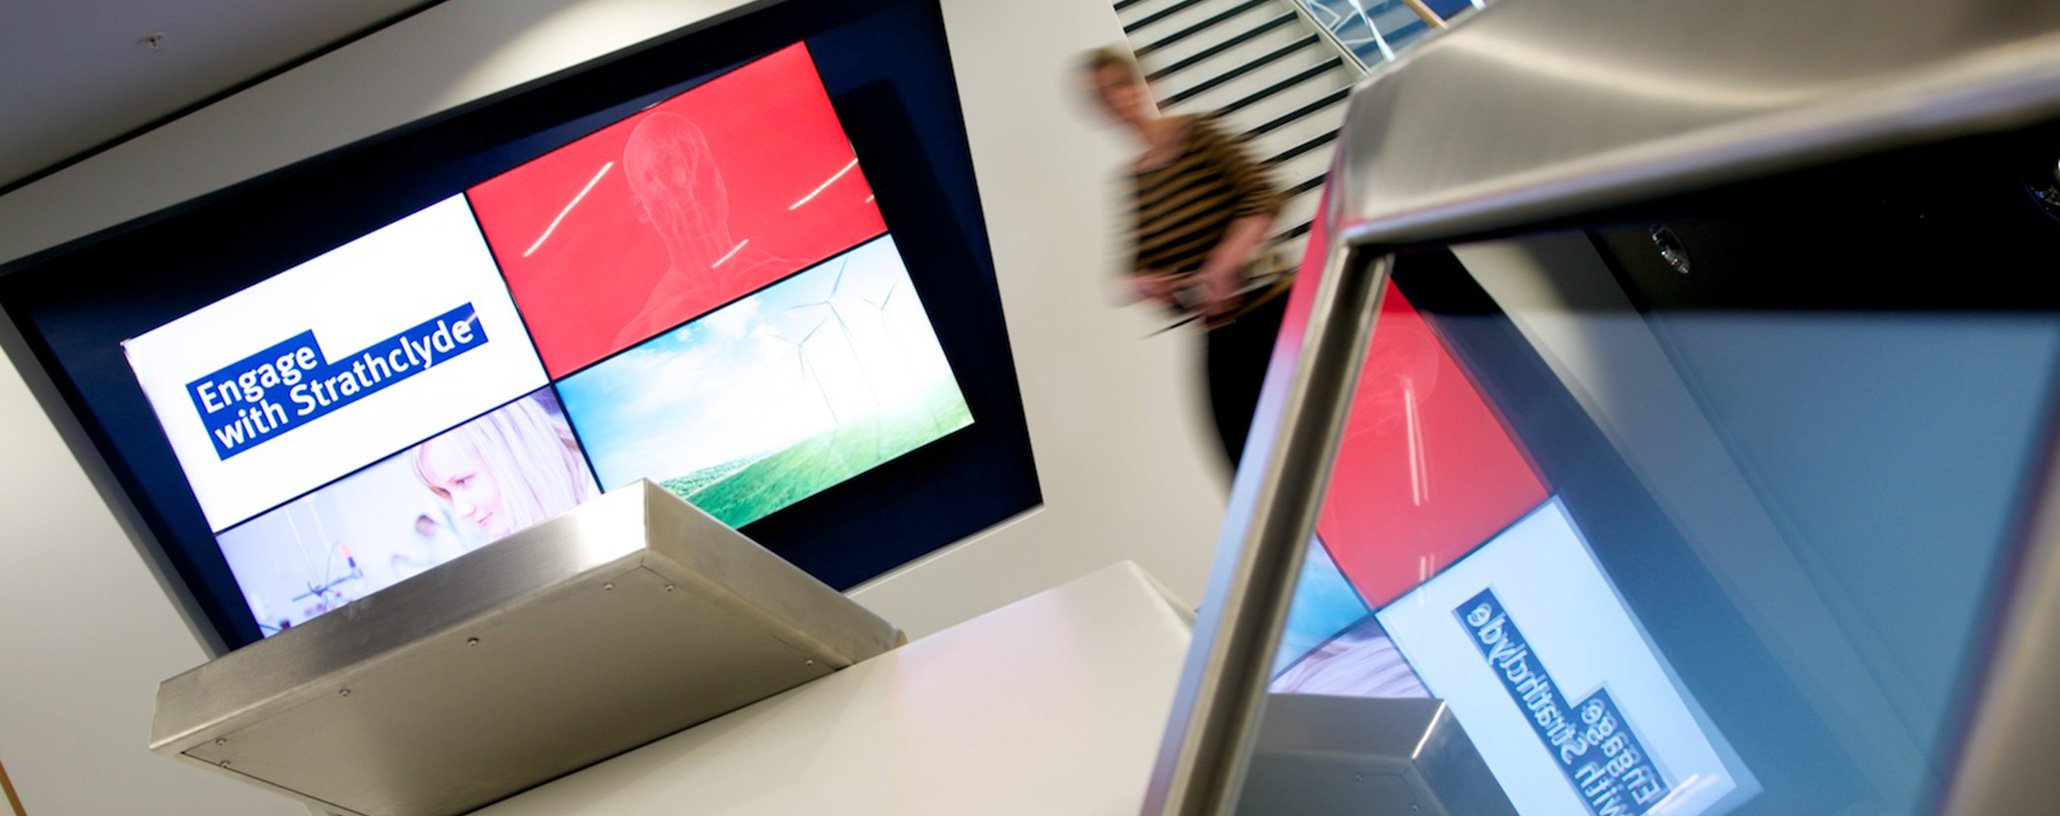 This image shows the TV display in the TIC building with the Engage with Strathclyde branding